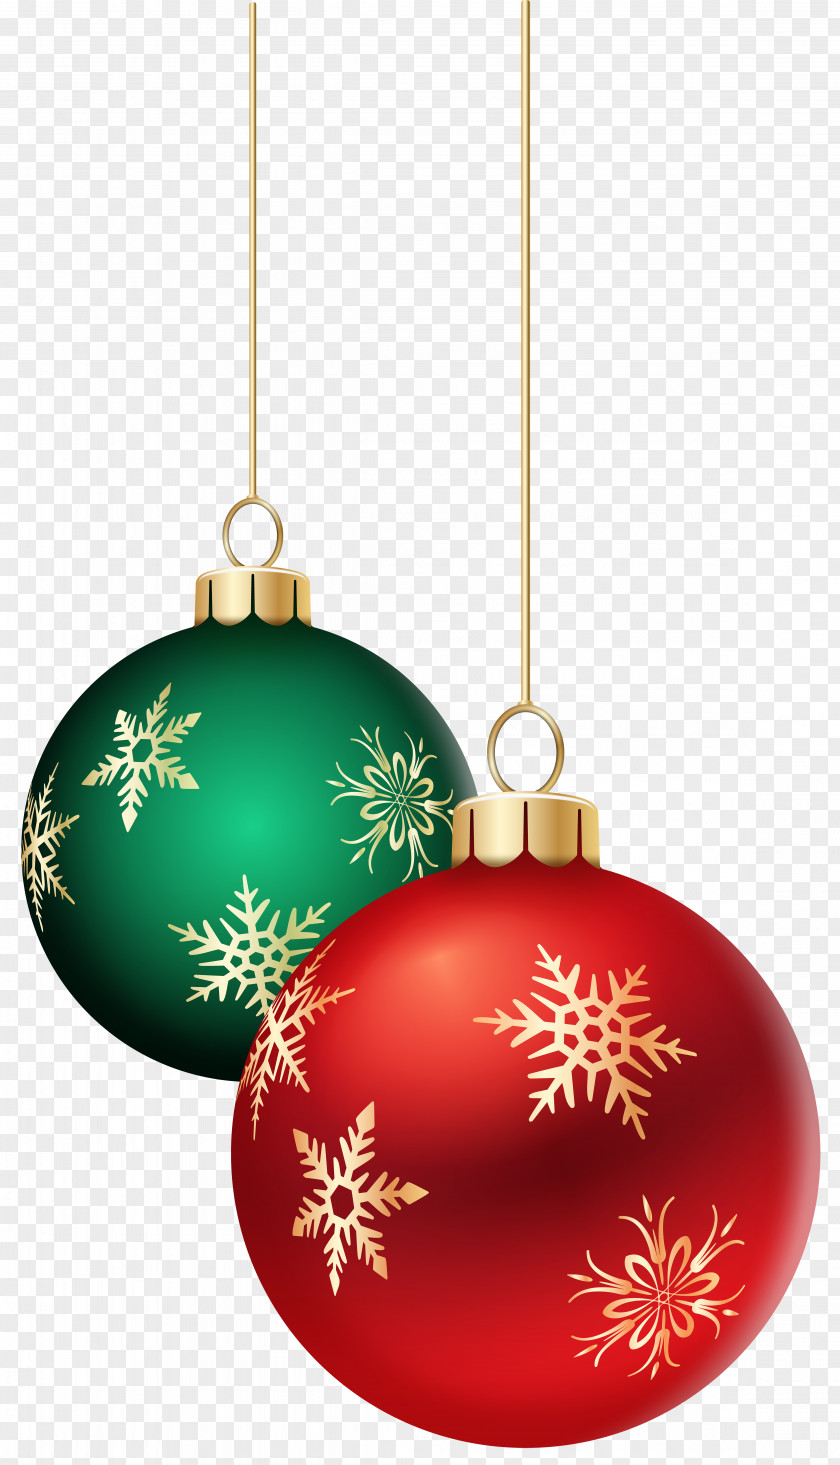 Silver Christmas Balls Clip Art Ornament Image Transparency PNG